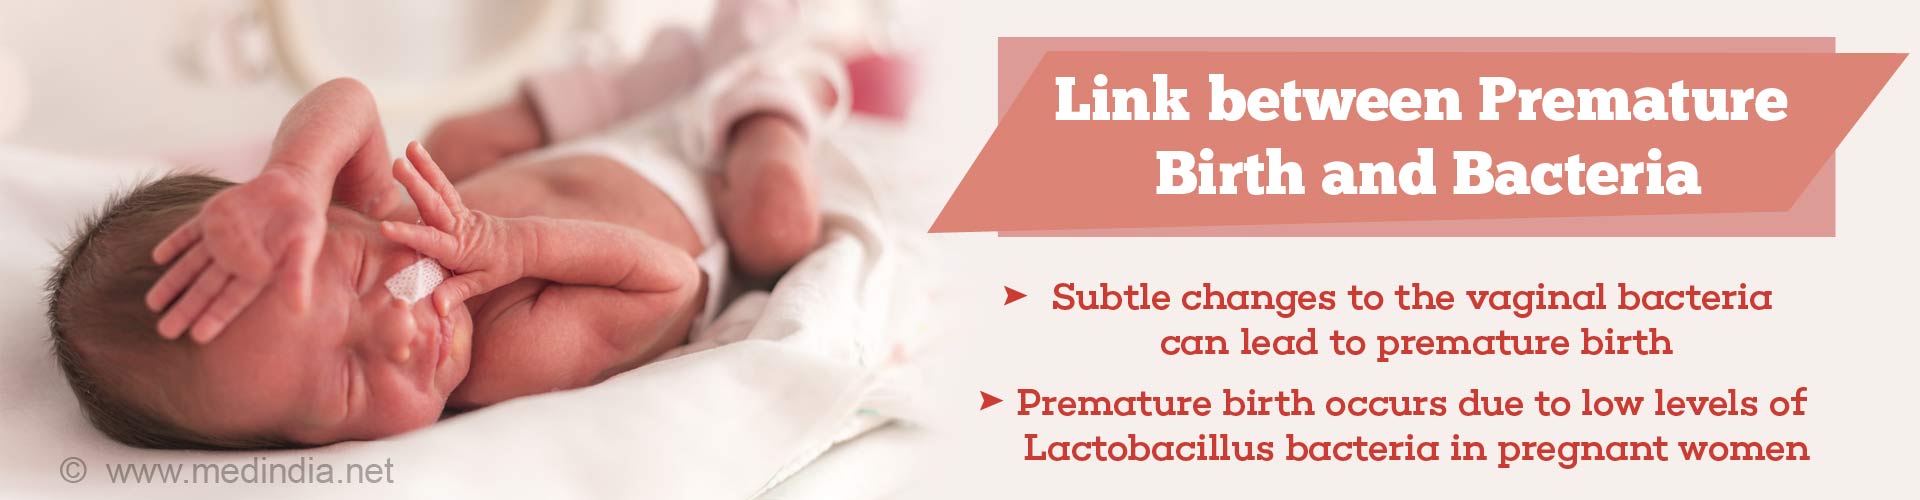 link between premature birth and bacteria
- subtle changes to the vaginal bacteria can lead to premature birth
- premature birth occurs due to low levels of lactobacillus bacteria in pregnant women